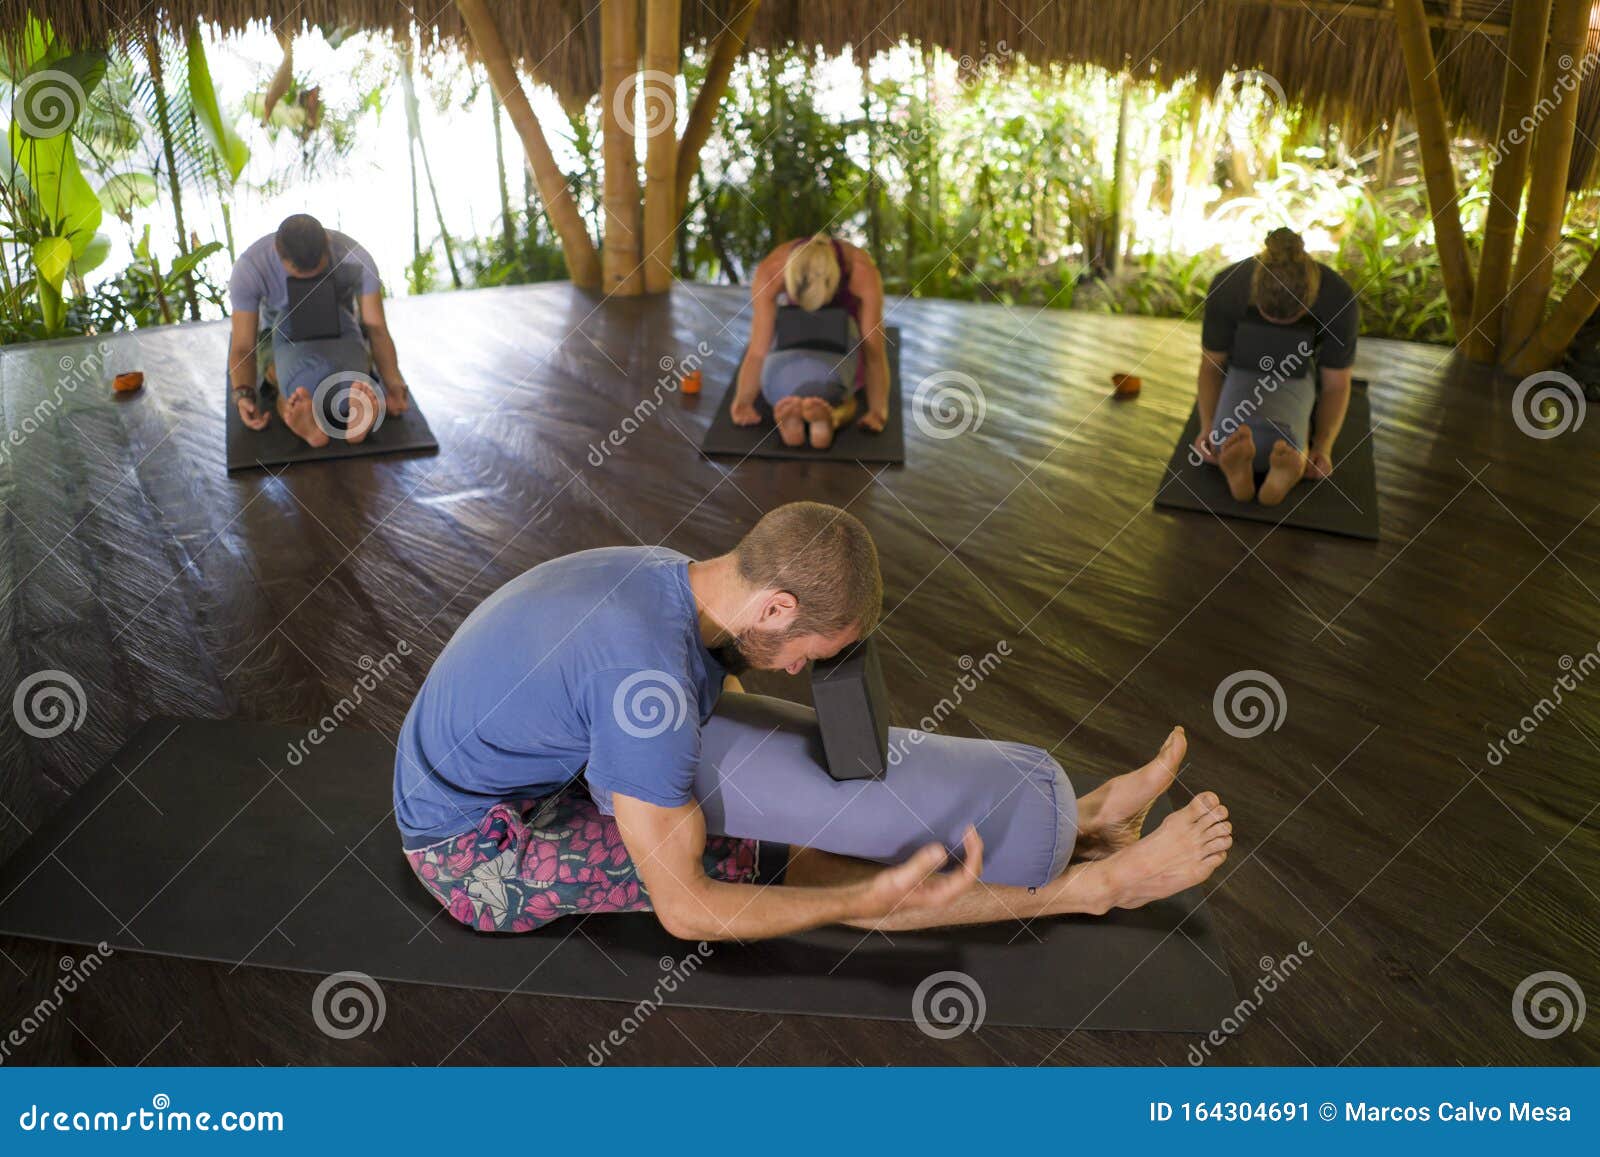 outdoors yoga lesson - group of young people and coach man practicing relaxation exercise at asian wellness retreat hut training